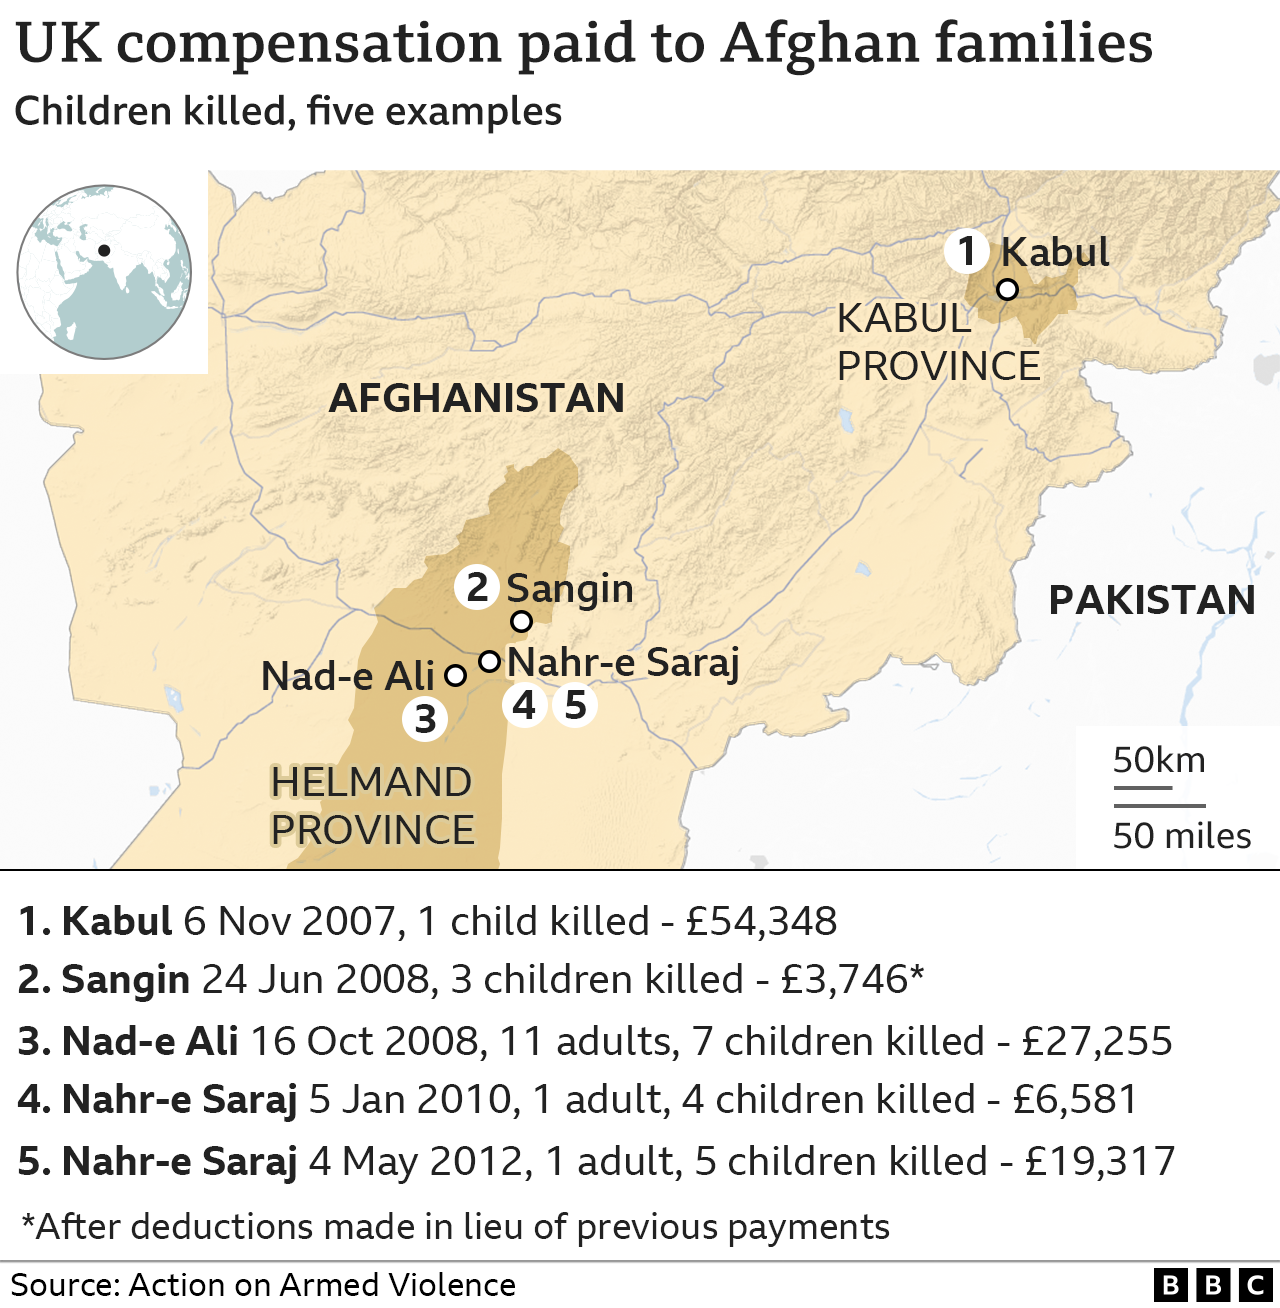 Map of Afghanistan showing locations of five incidents where children died in fighting involving UK troops - and the amount of compensation awarded - from £3,746 to £54,348.